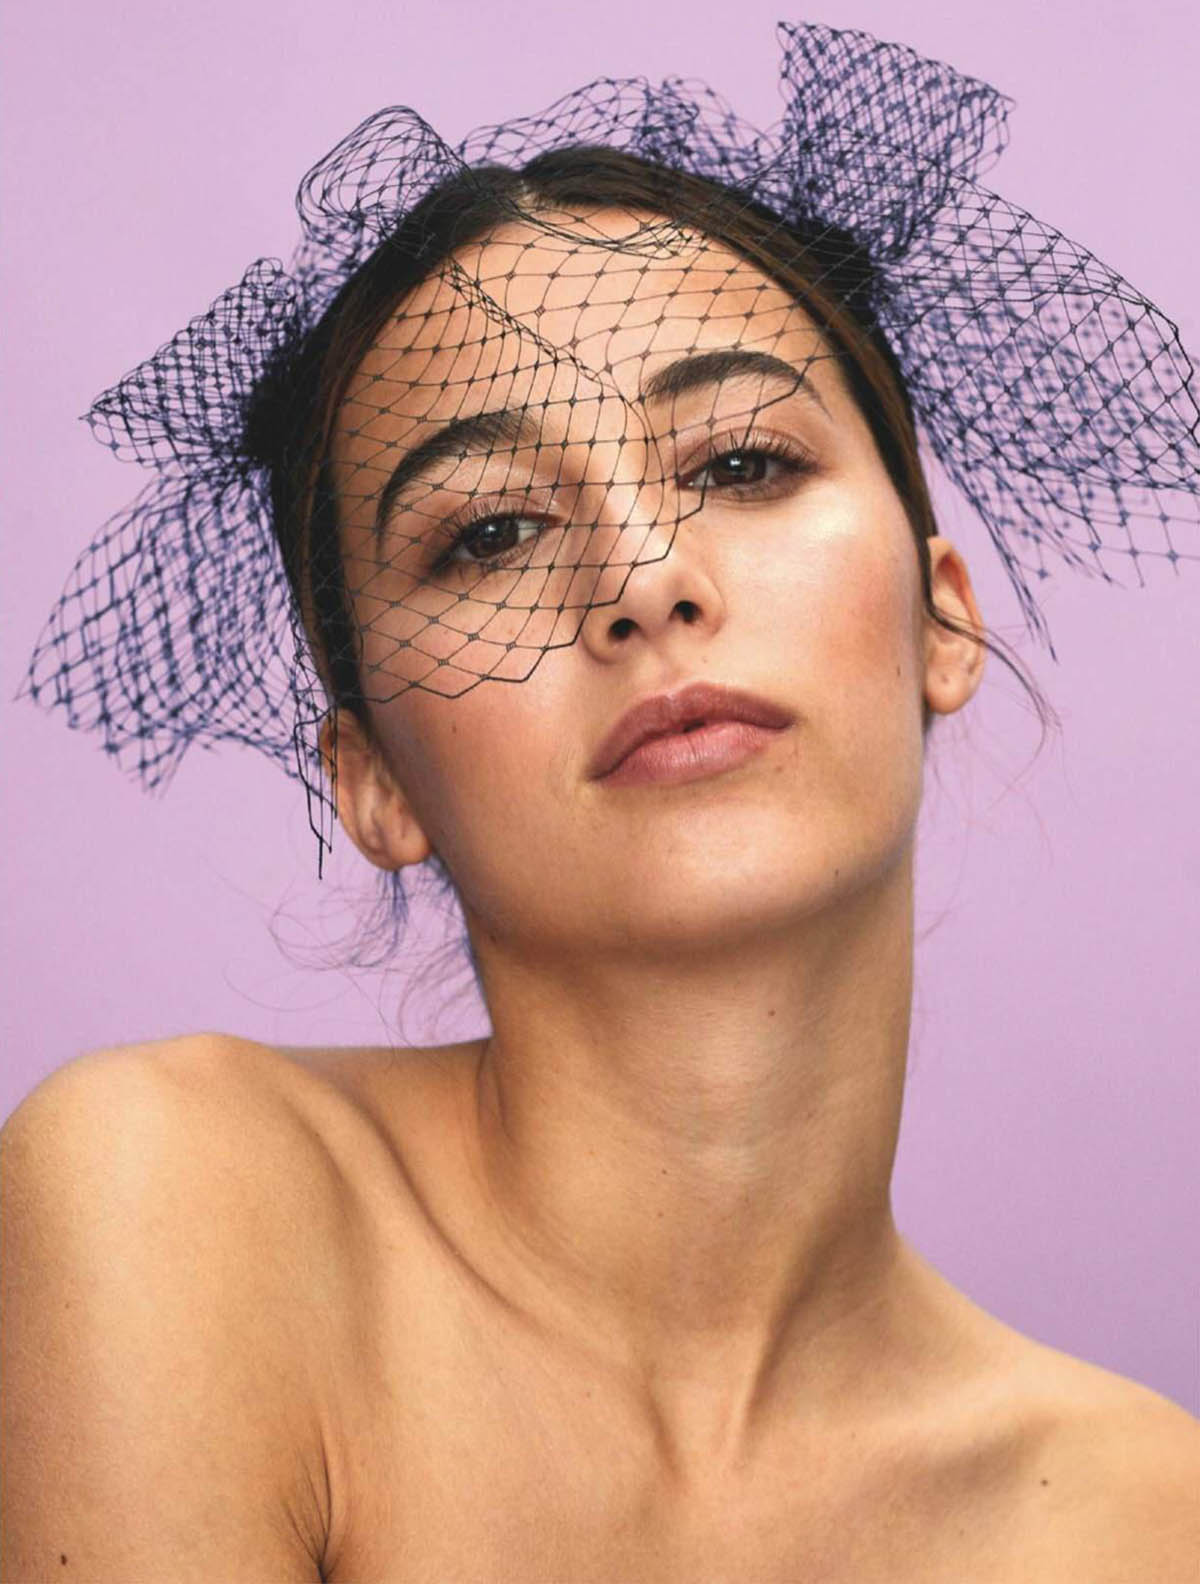 Amaia Aberasturi by Fede Delibes for InStyle Spain April 2021